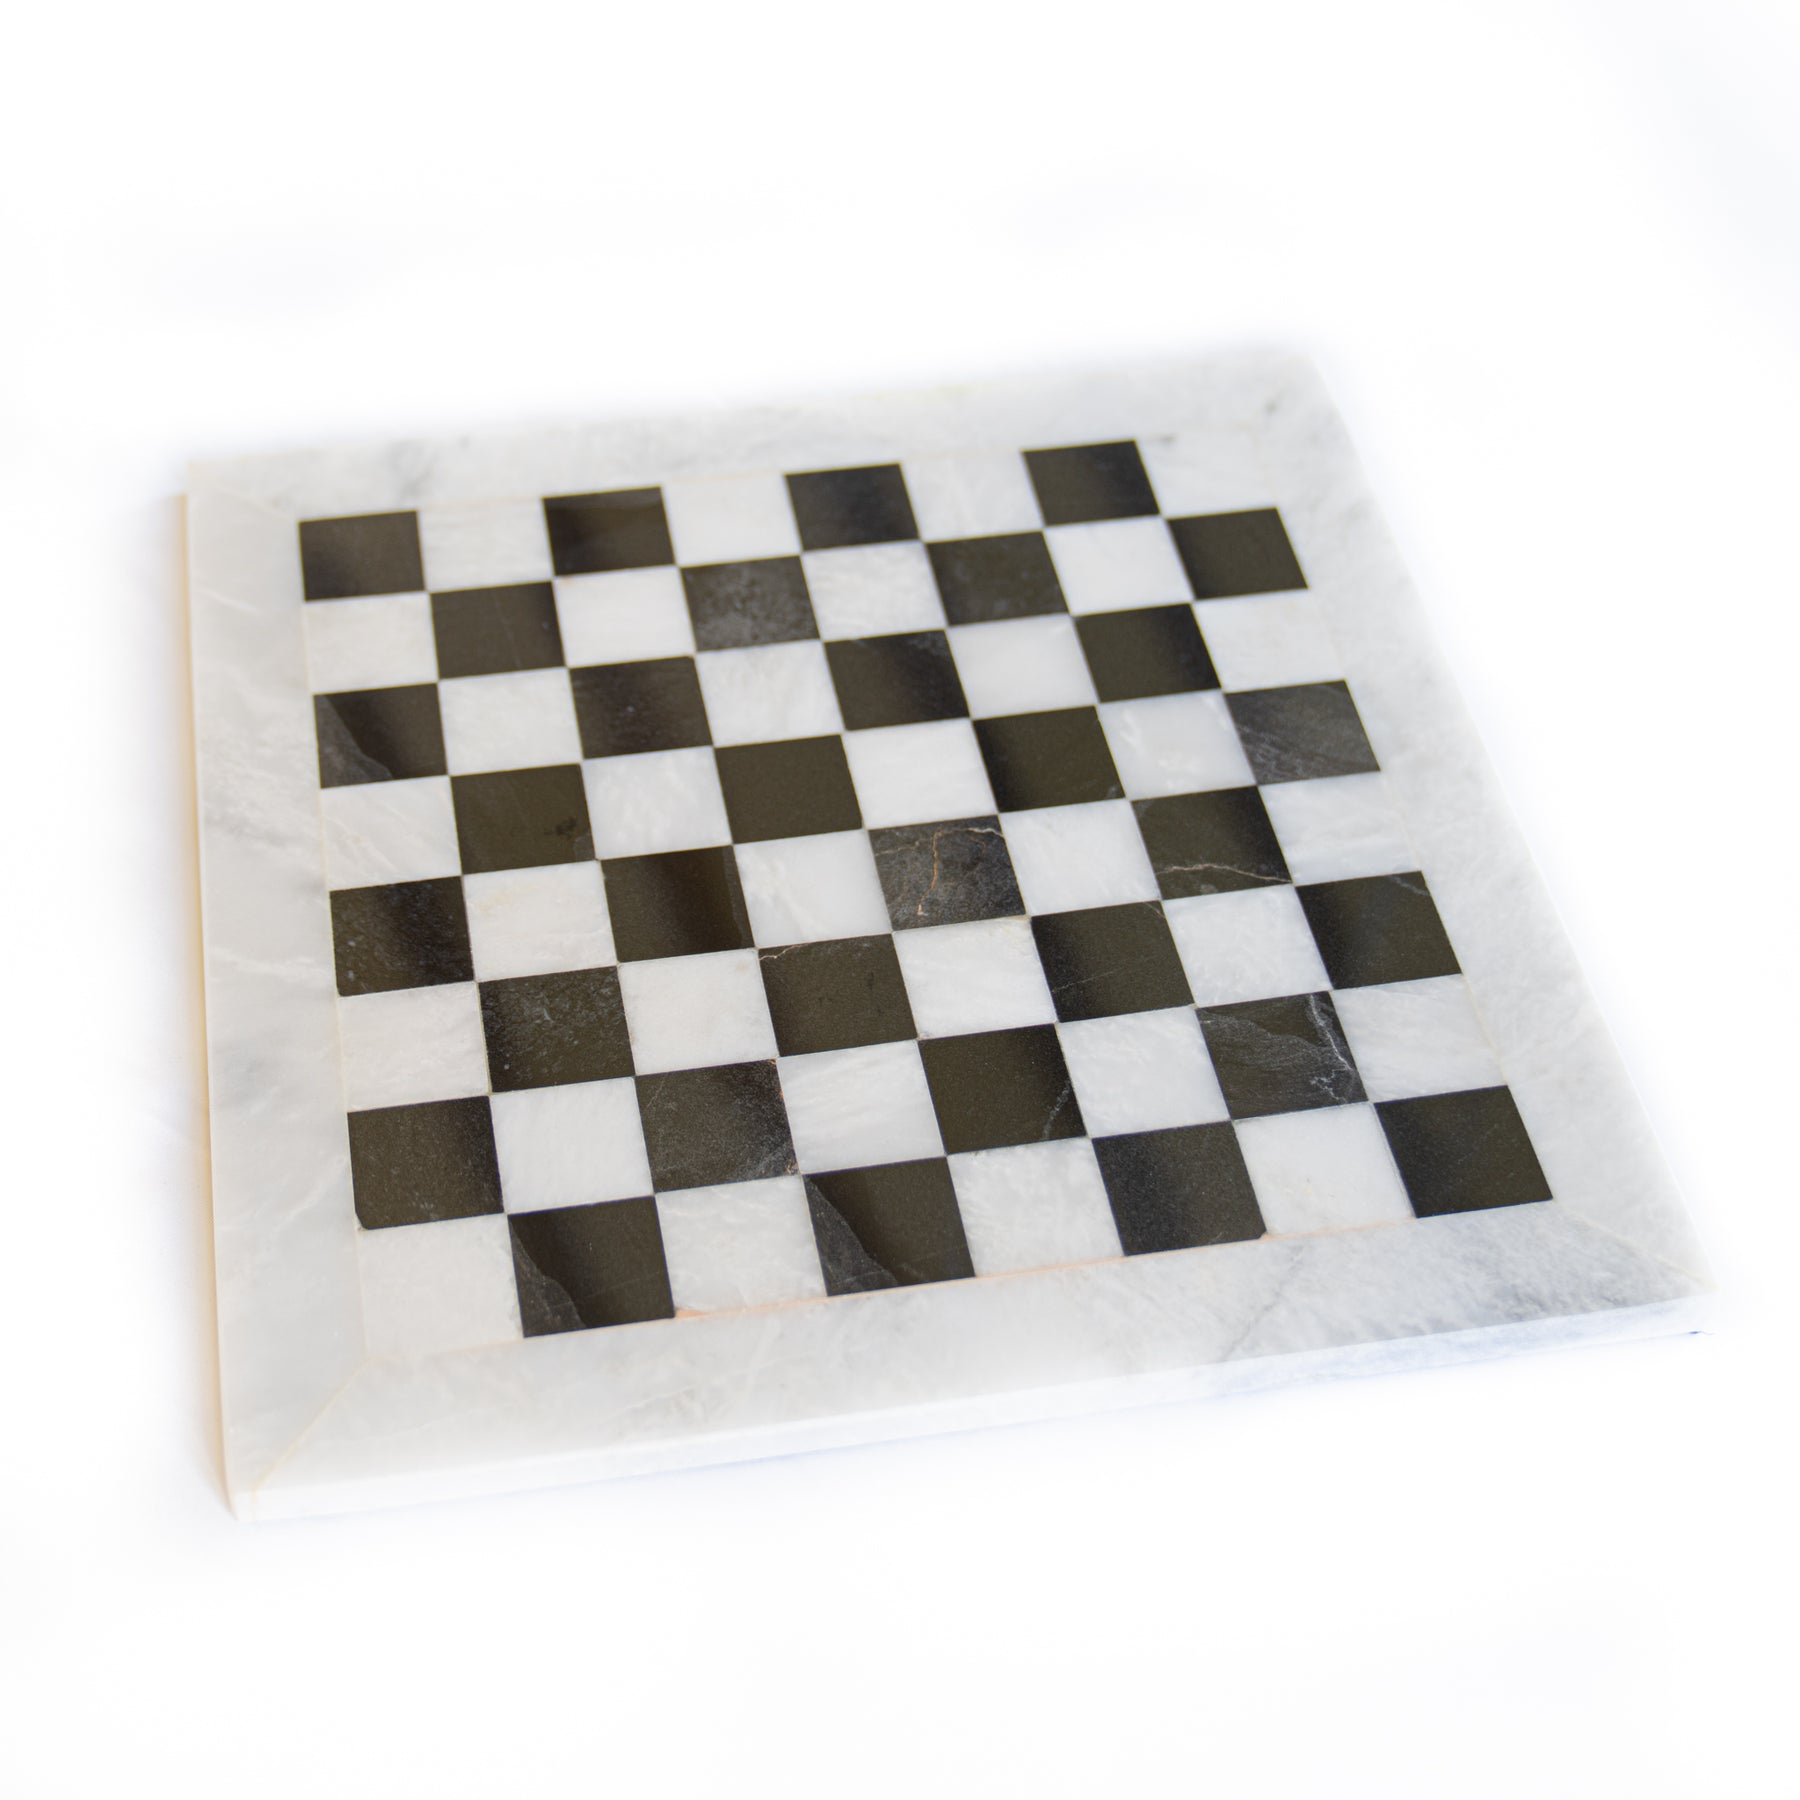 14 Black and White Marble Chess Set – Chess House